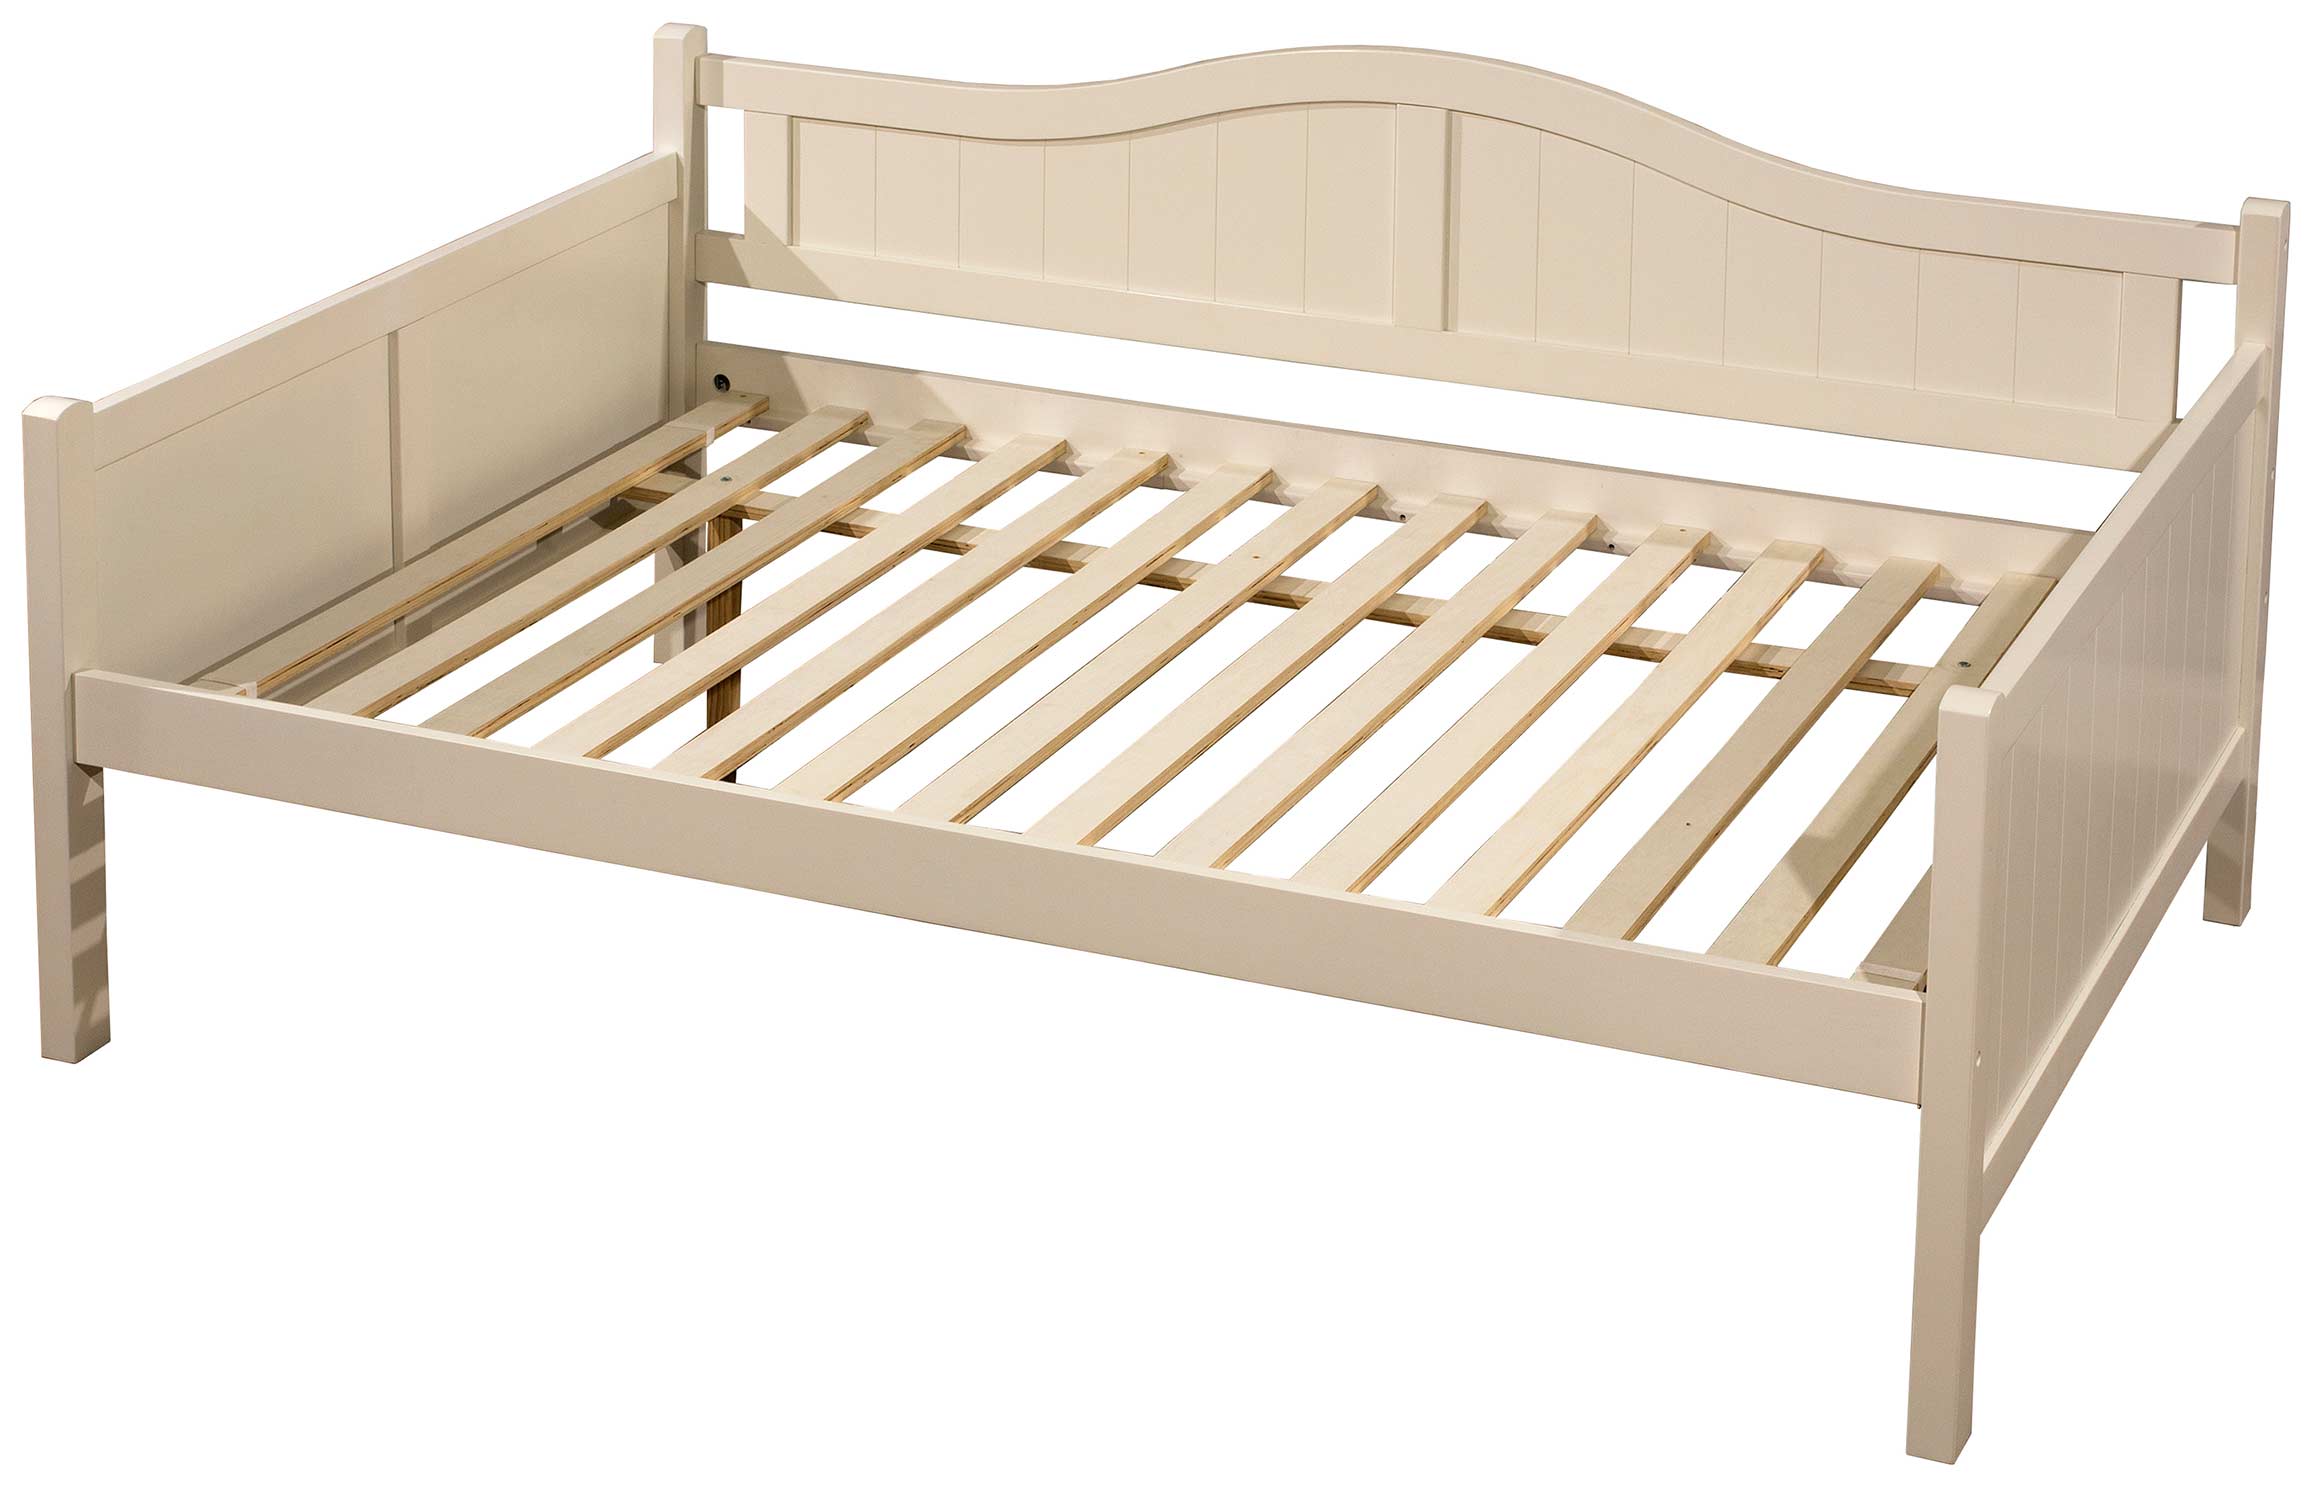 Hillsdale Staci Daybed - Full - White